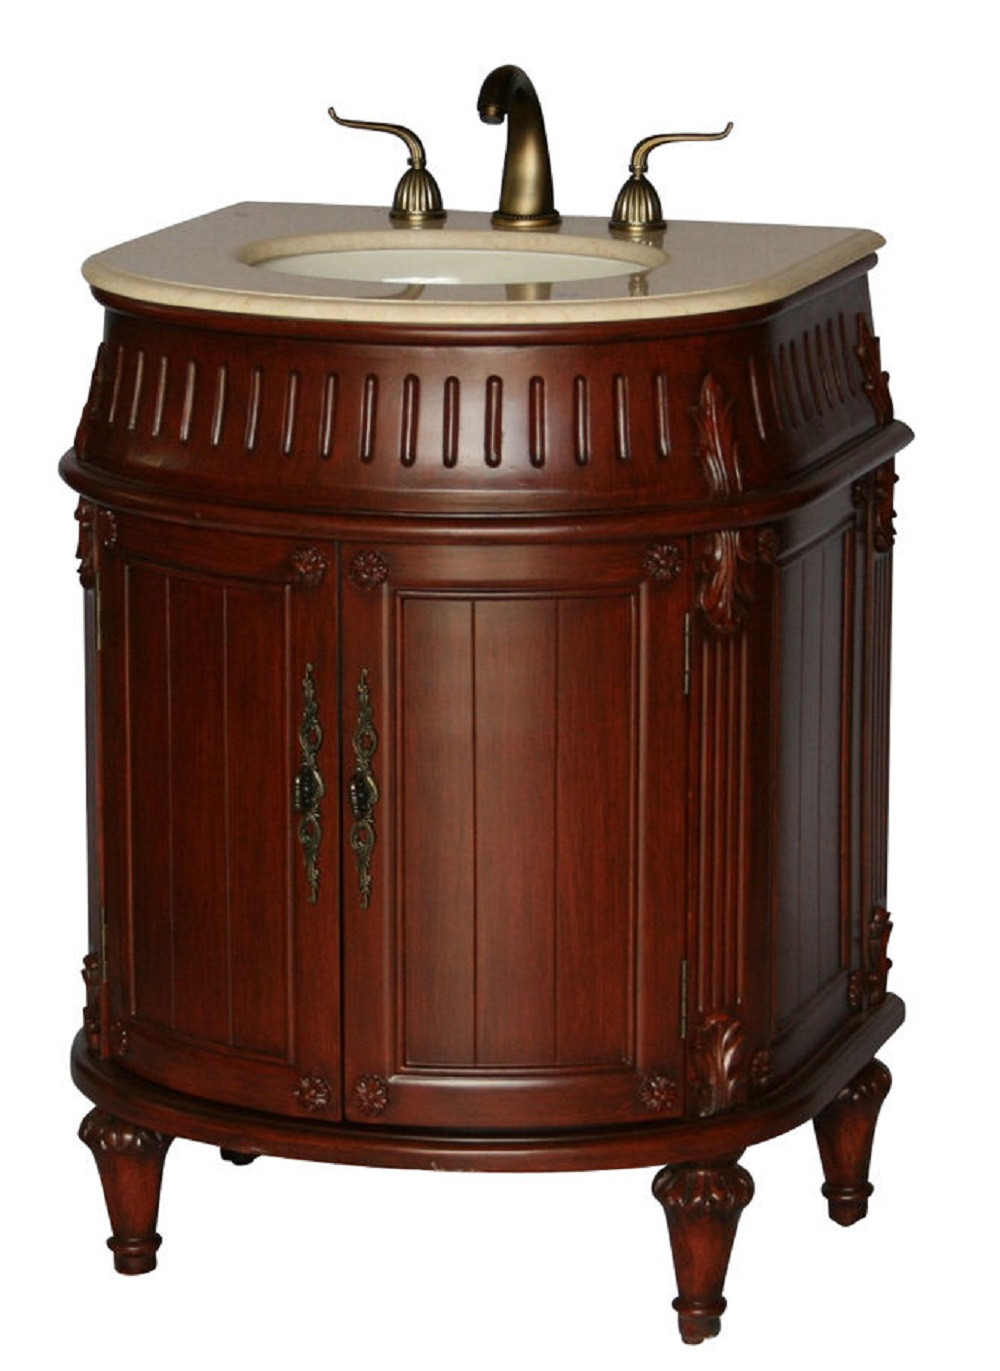 21 Inch Bathroom Vanity
 26 inch Bathroom Vanity Traditional Round Front Style